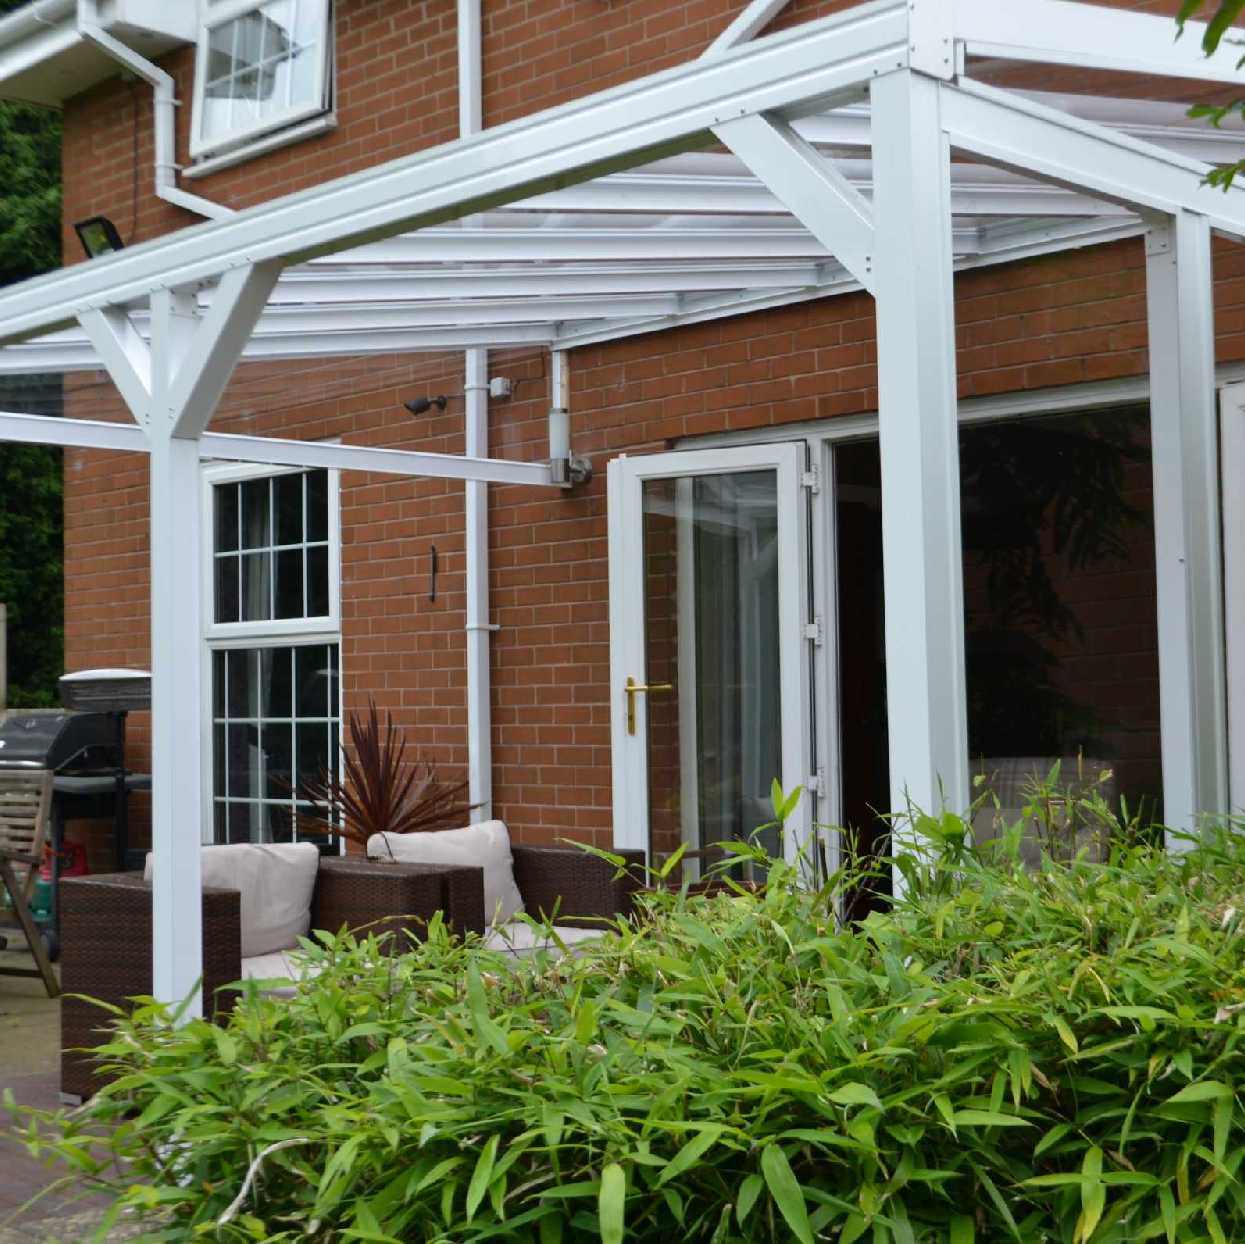 Omega Smart Lean-To Canopy, White with 6mm Glass Clear Plate Polycarbonate Glazing - 4.9m (W) x 2.5m (P), (3) Supporting Posts from Omega Build